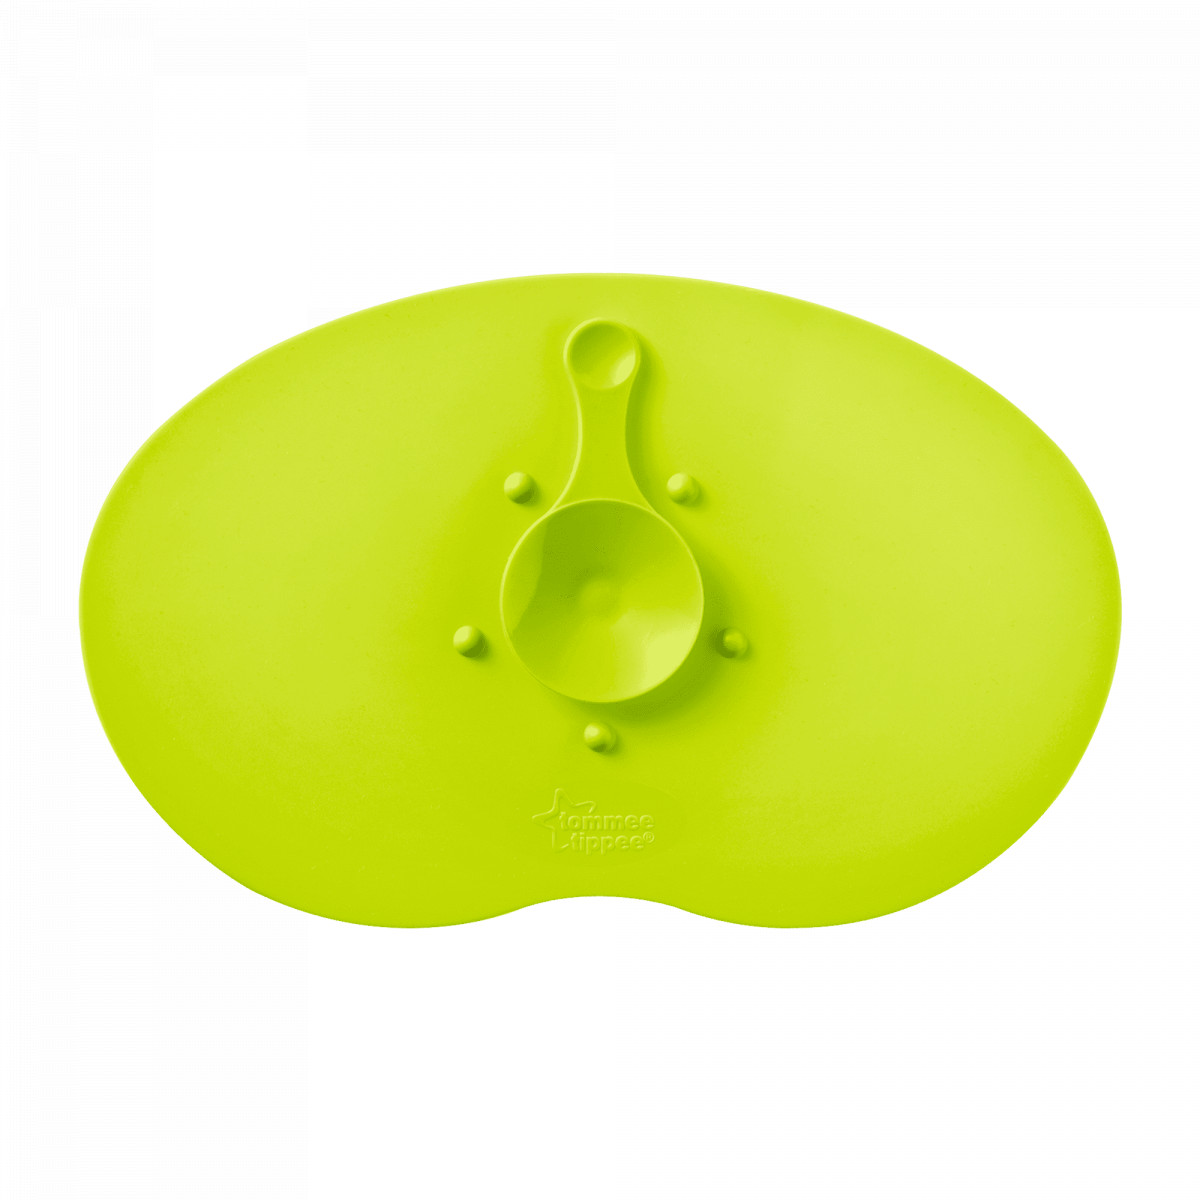 Support en silicone vert Tommee Tippee - Boutique Toup'tibou - photo 7